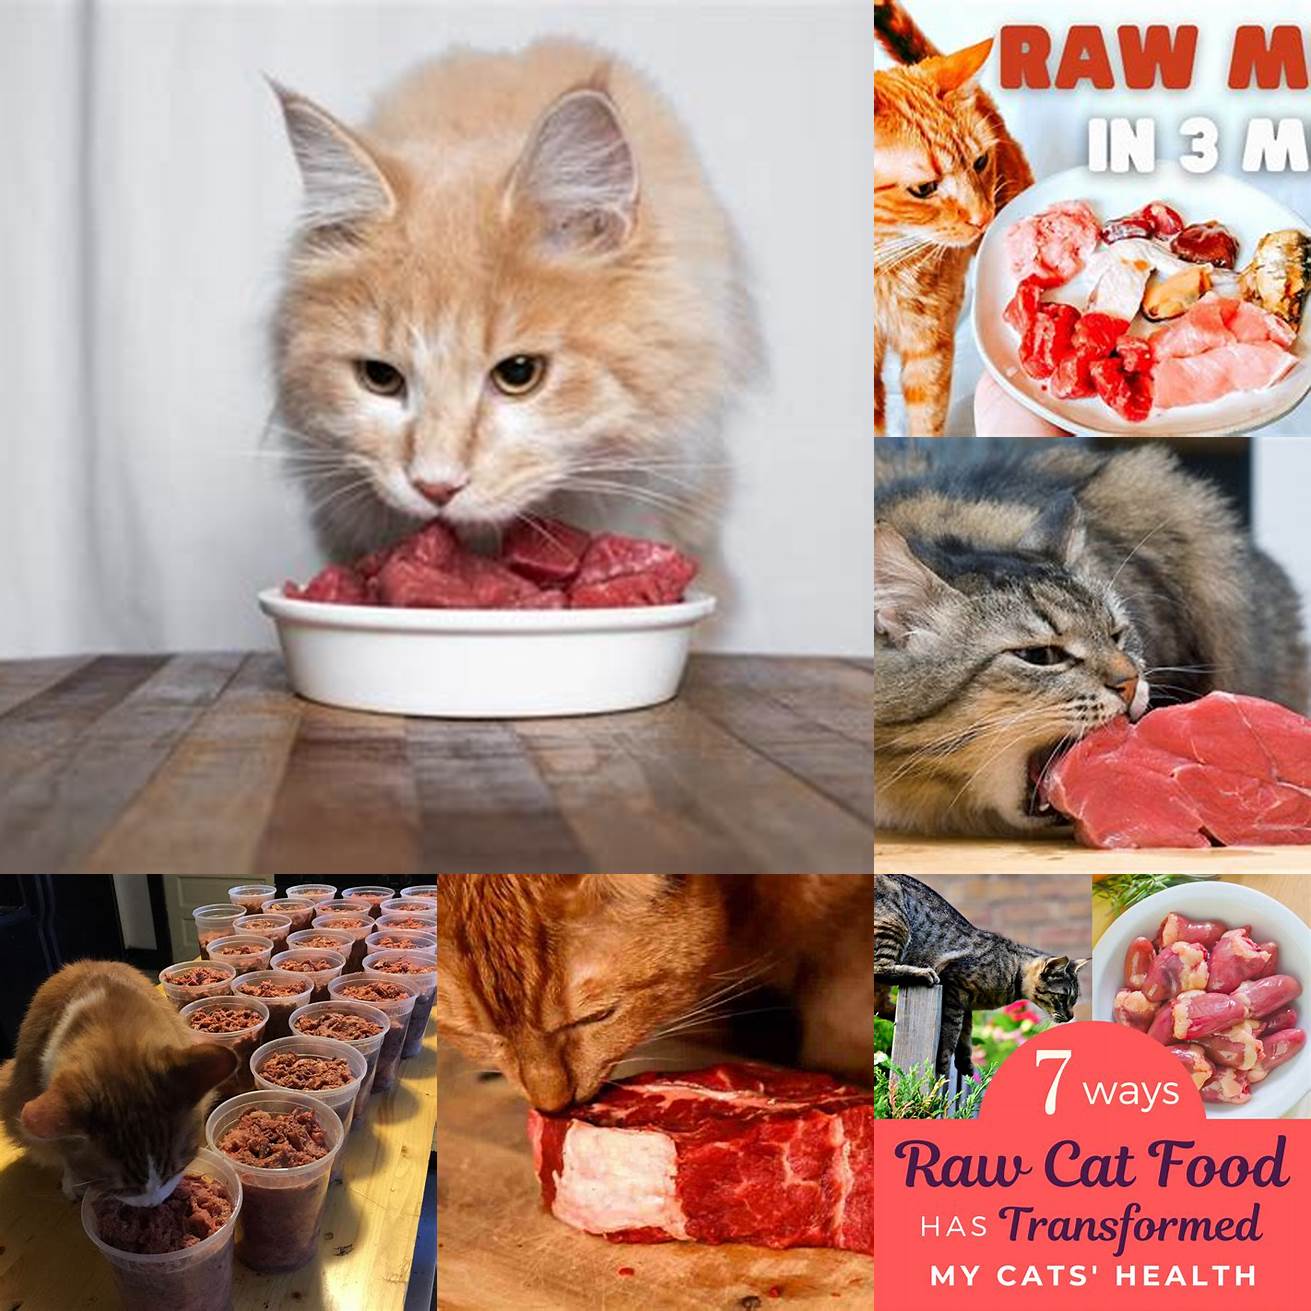 Q Is it safe to feed my cat raw beef